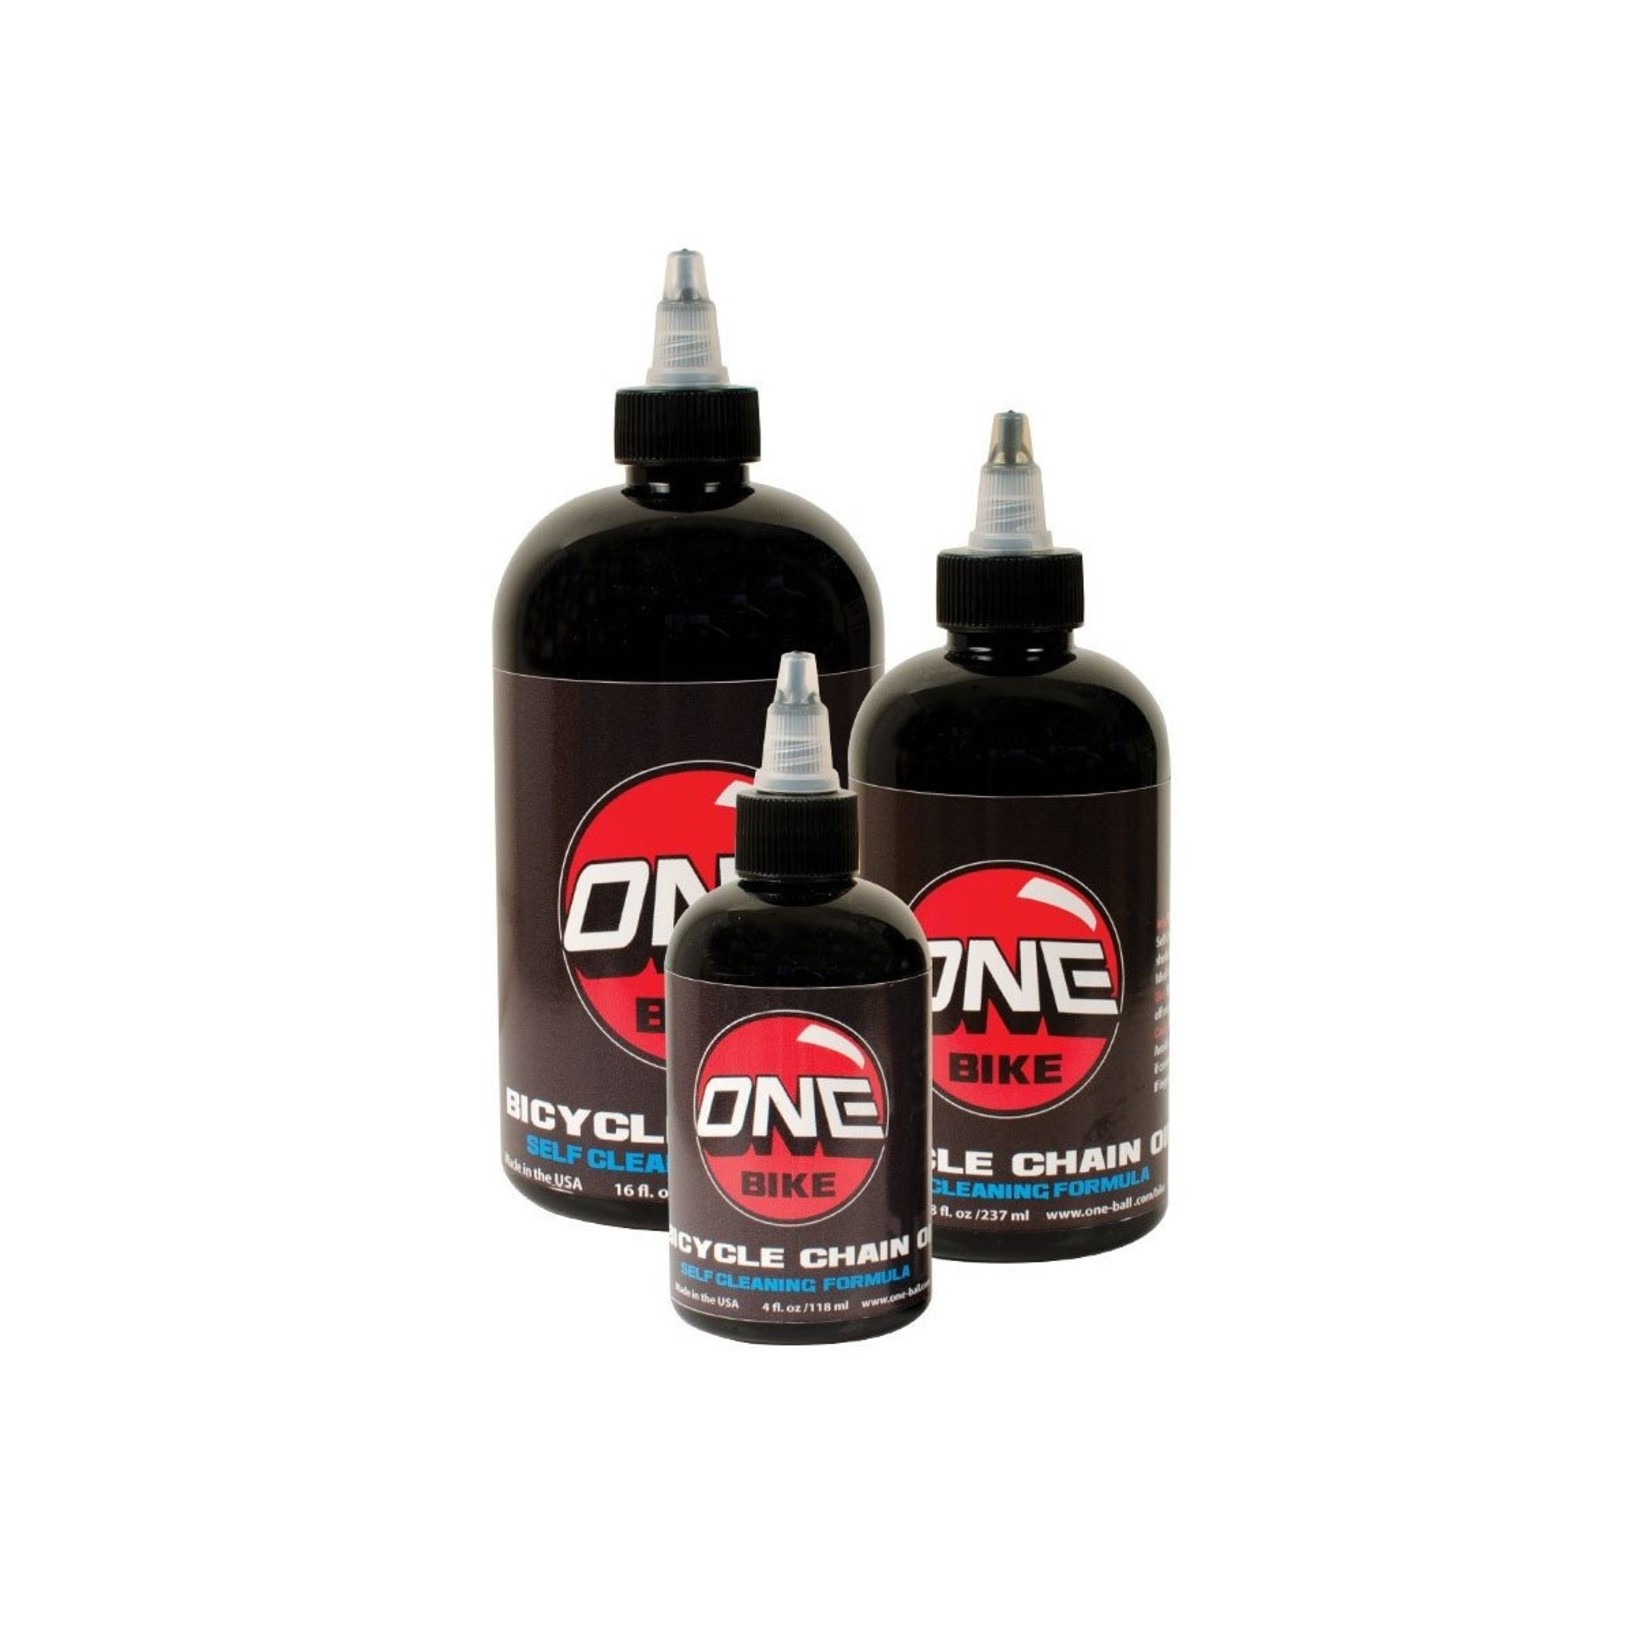 One Ball Oil Self Cleaning - 2oz